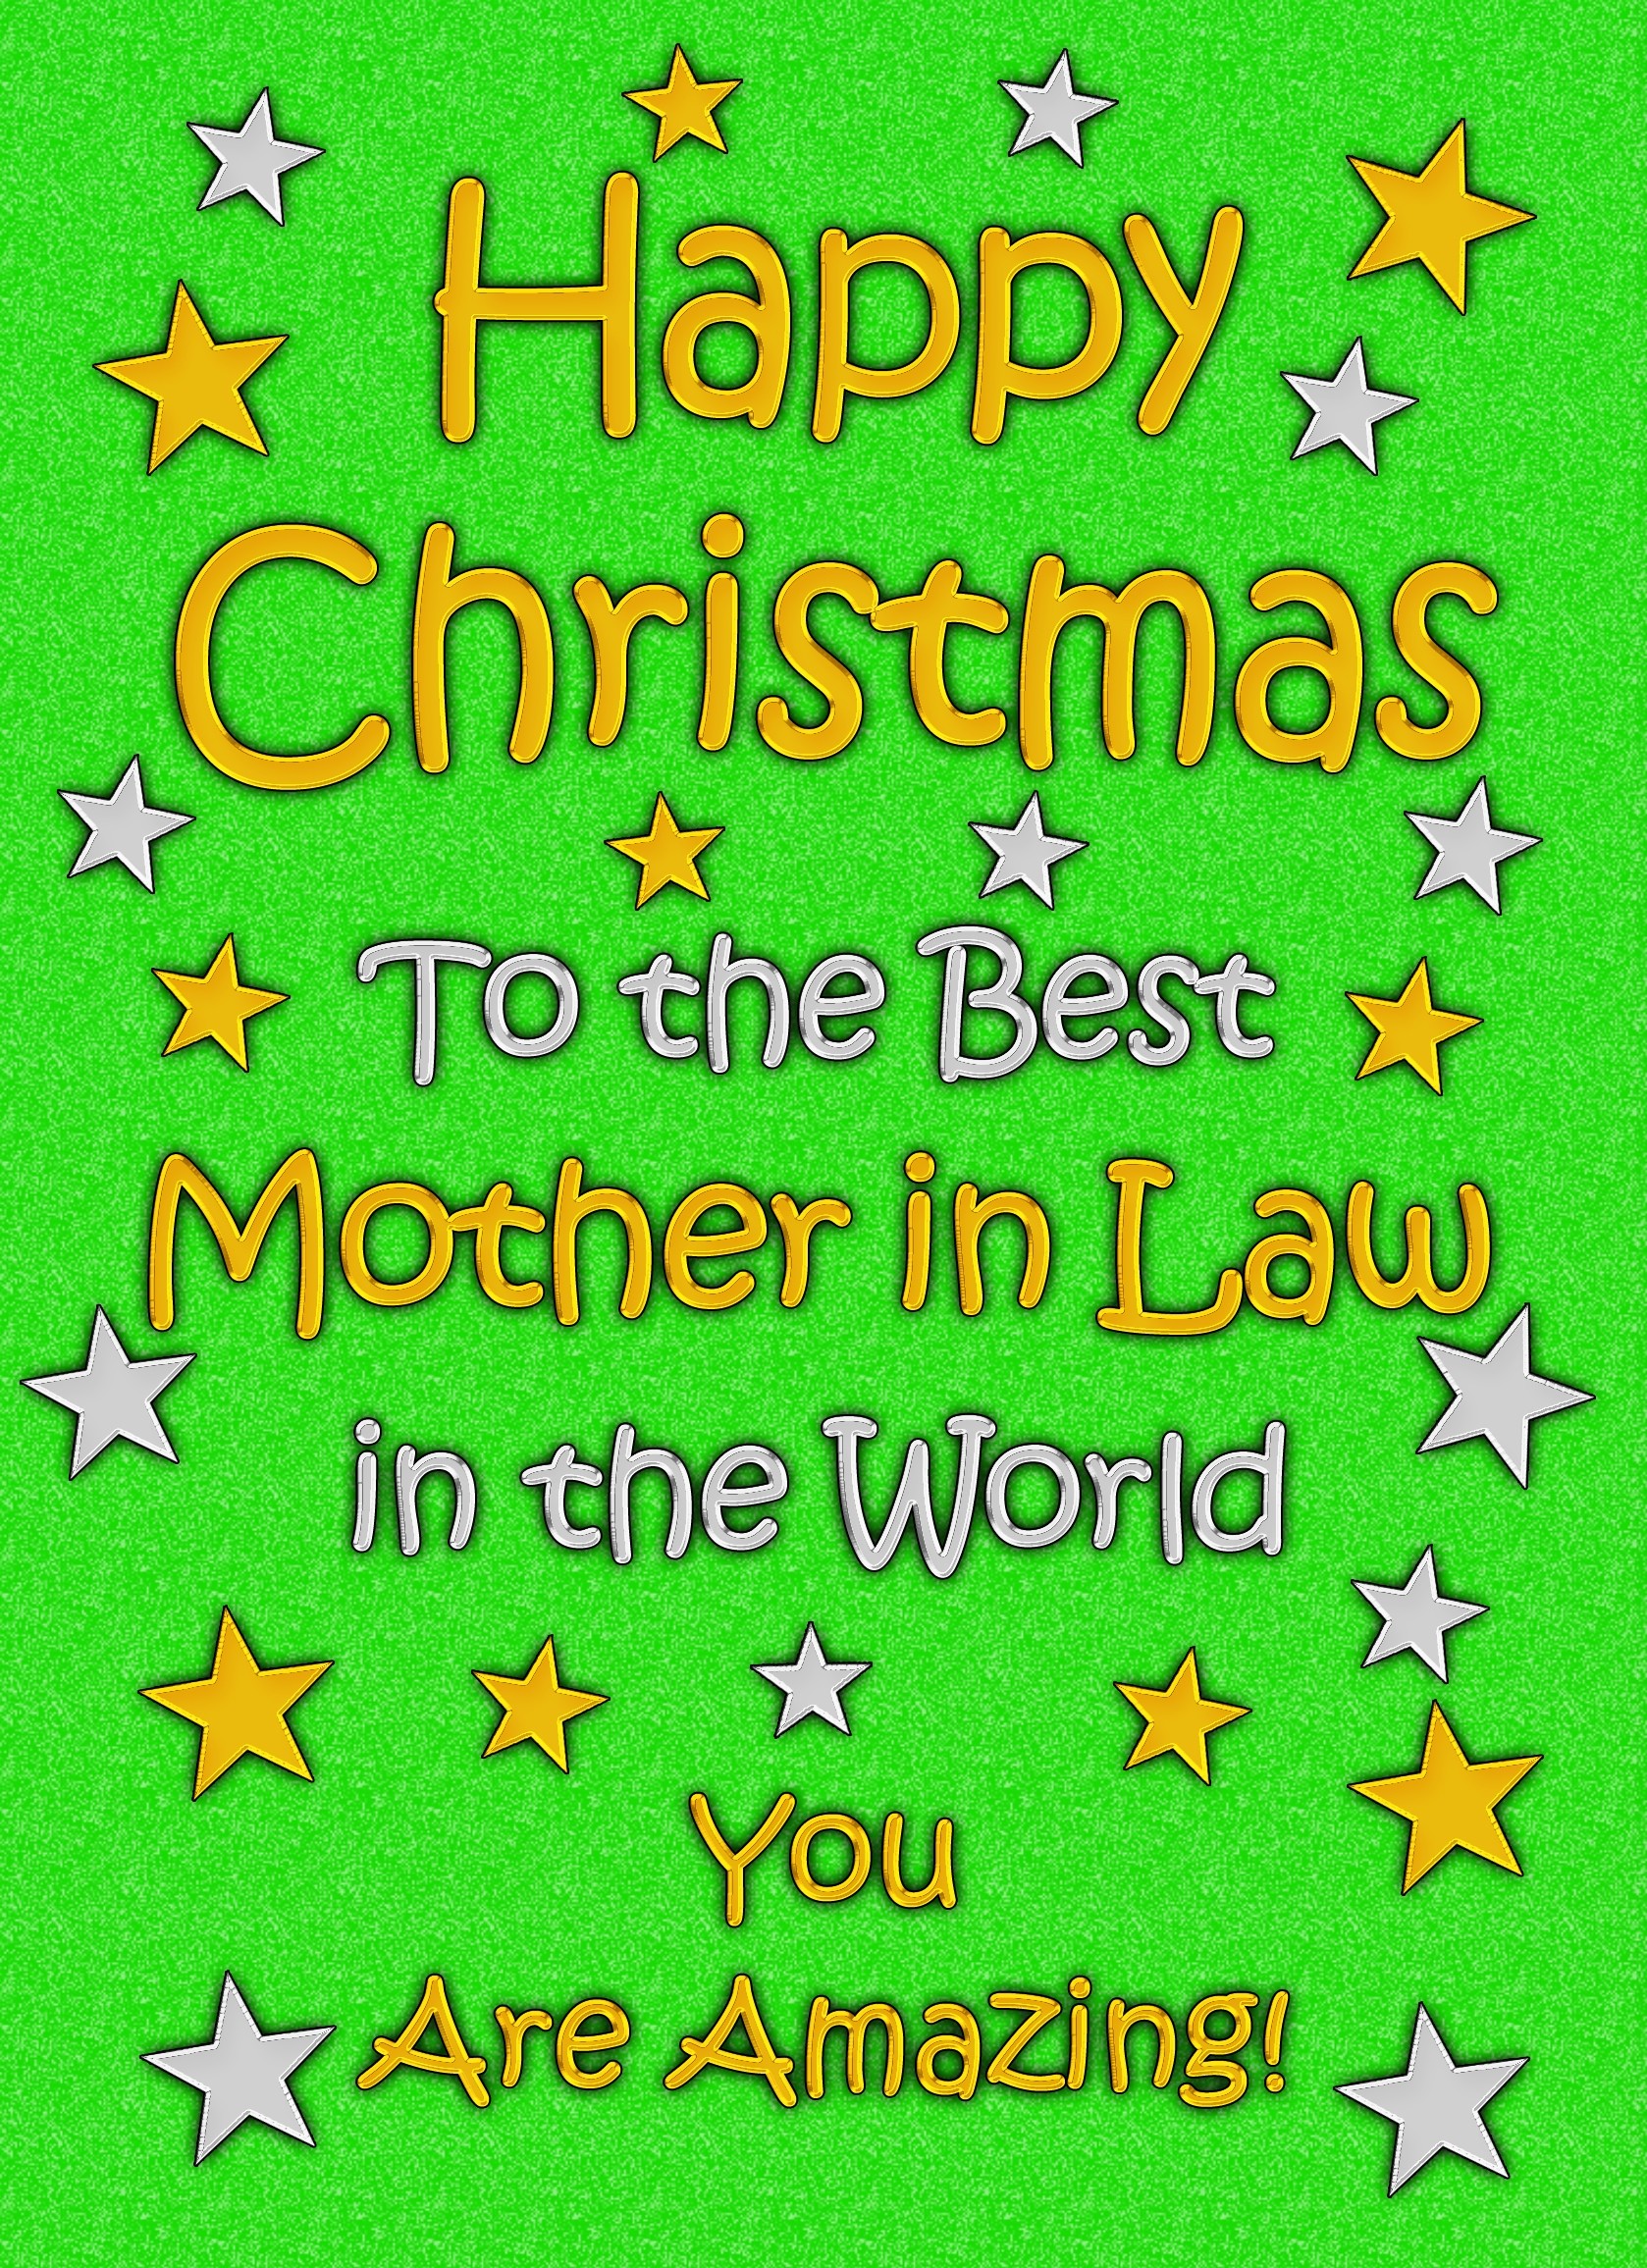 Mother in Law Christmas Card (Green)